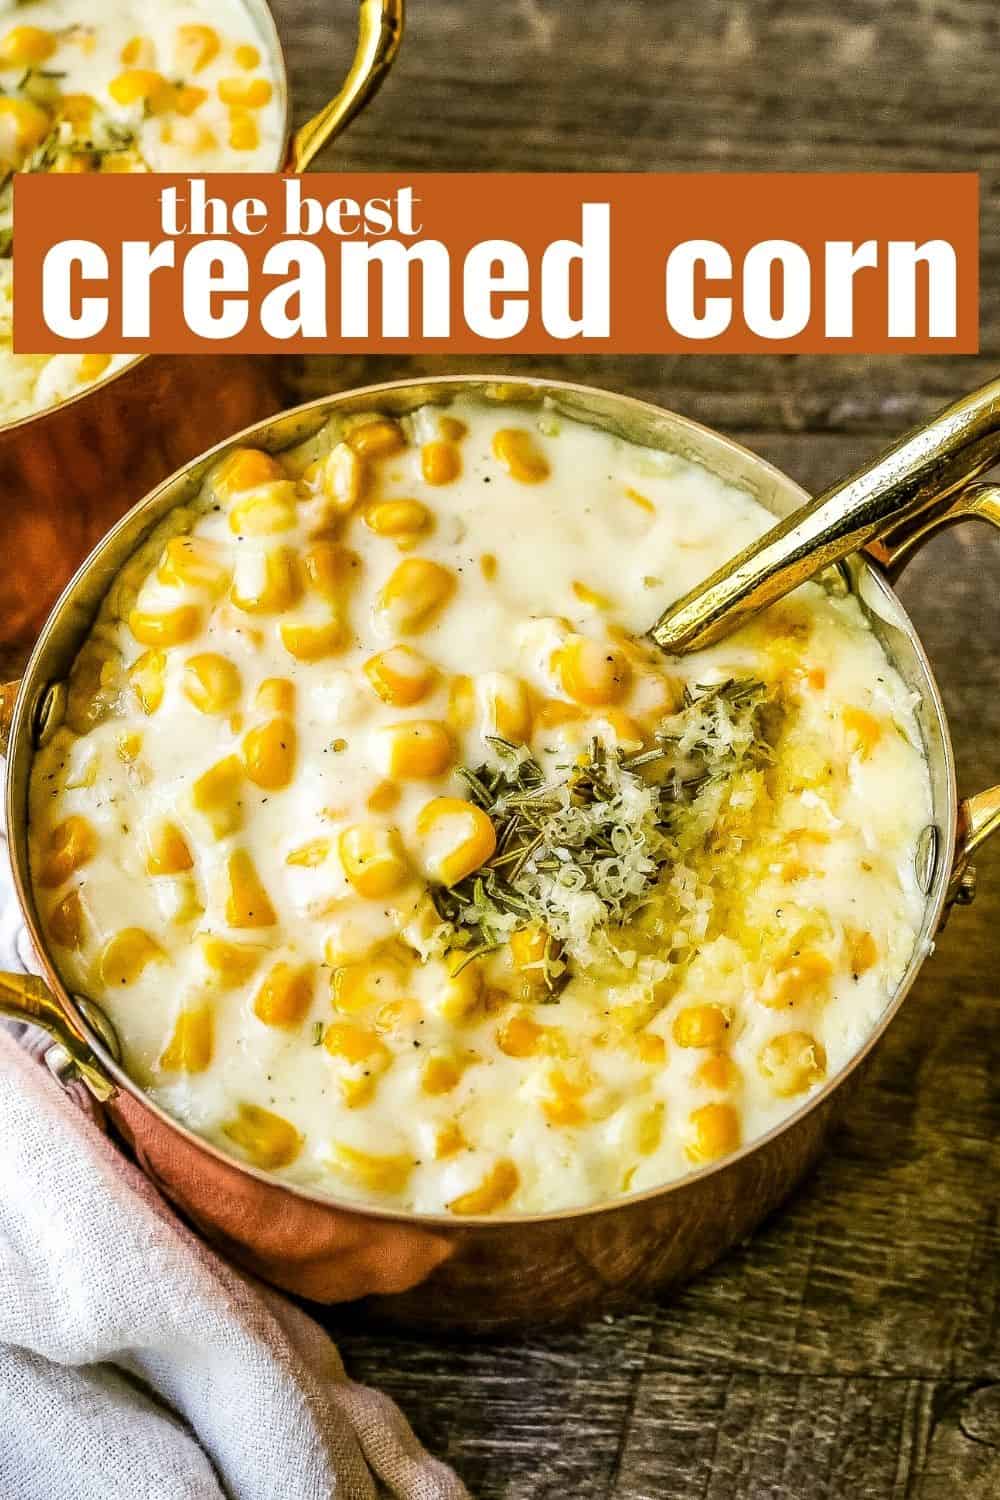 Creamed Corn is made with corn, fresh cream, butter, parmesan cheese, and salt. This is the best creamed corn recipe! We serve this every Thanksgiving and it is the most popular side dish at the table.